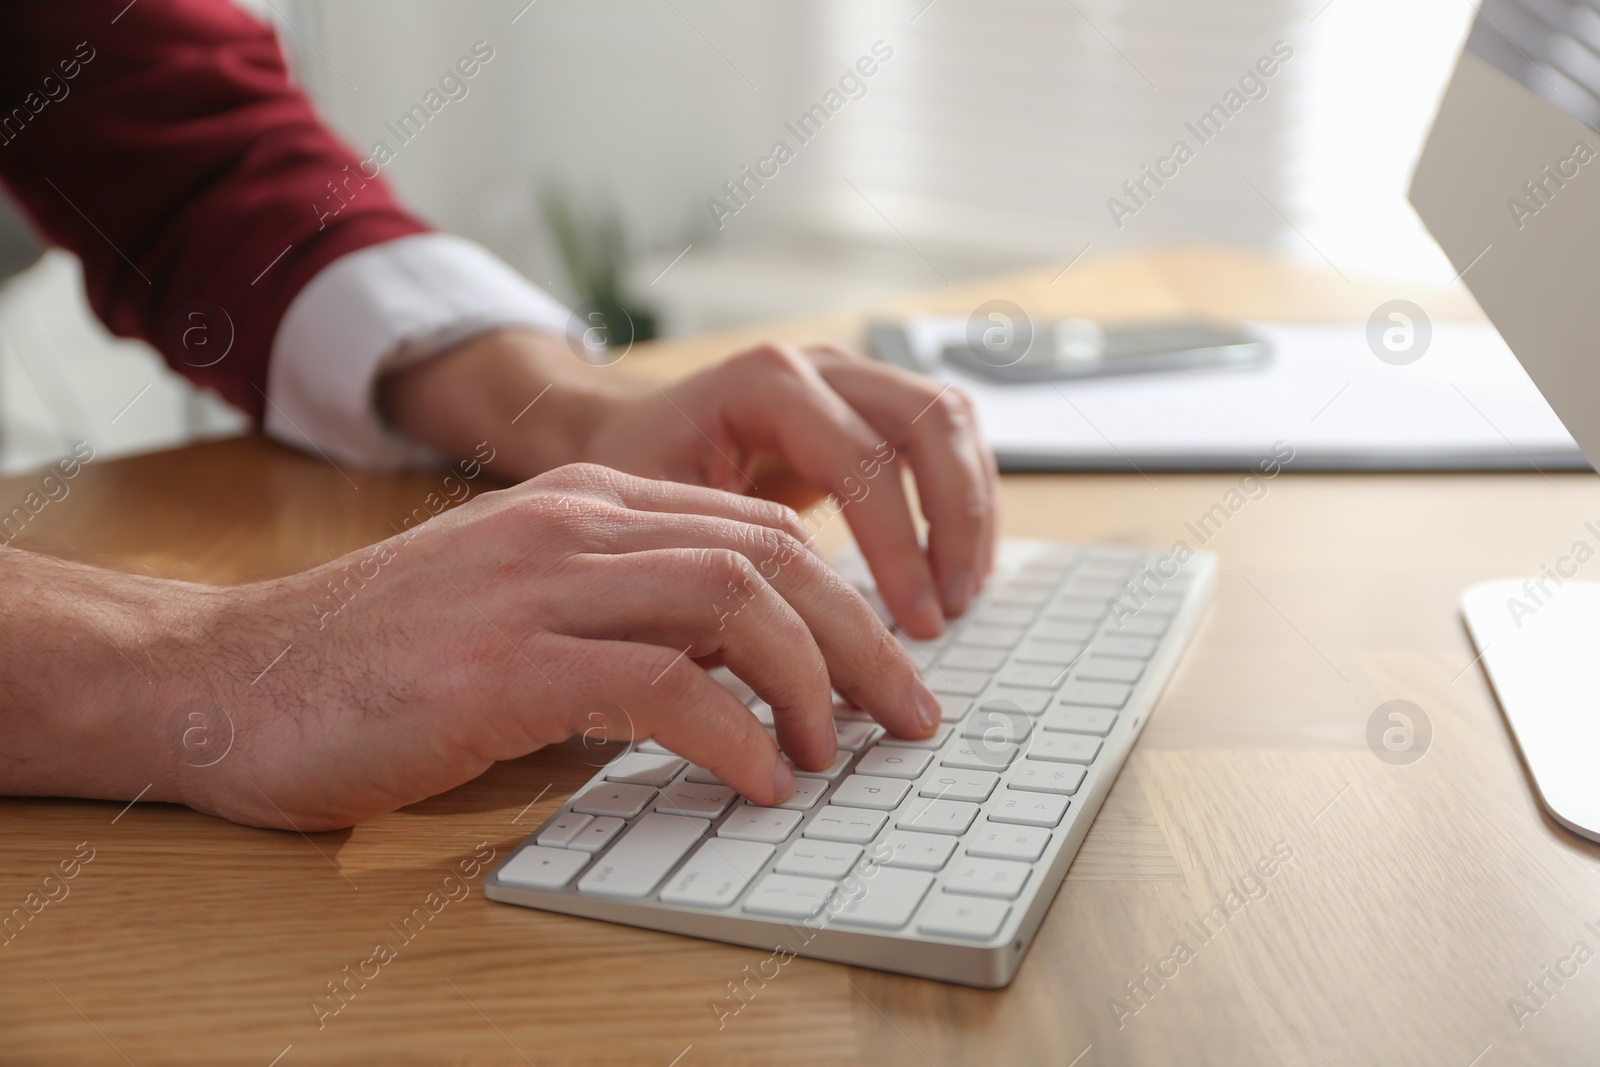 Photo of Freelancer working on computer at table indoors, closeup